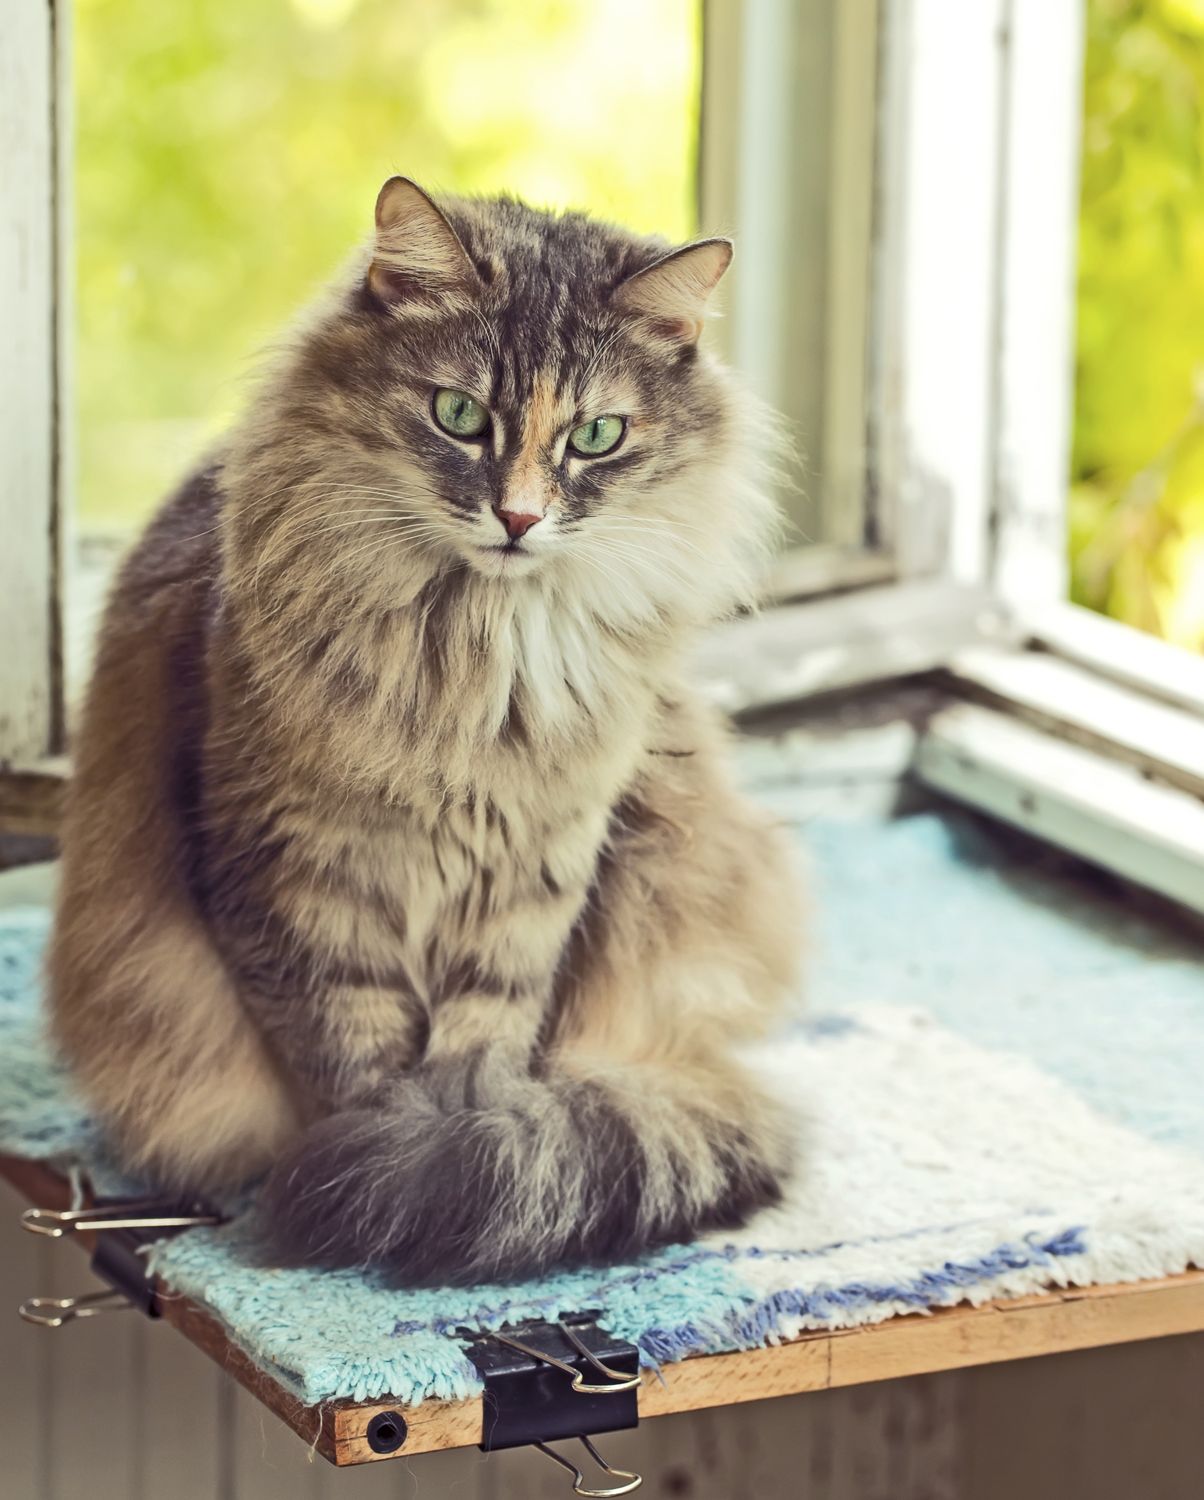 Cat sitting on a table mat.